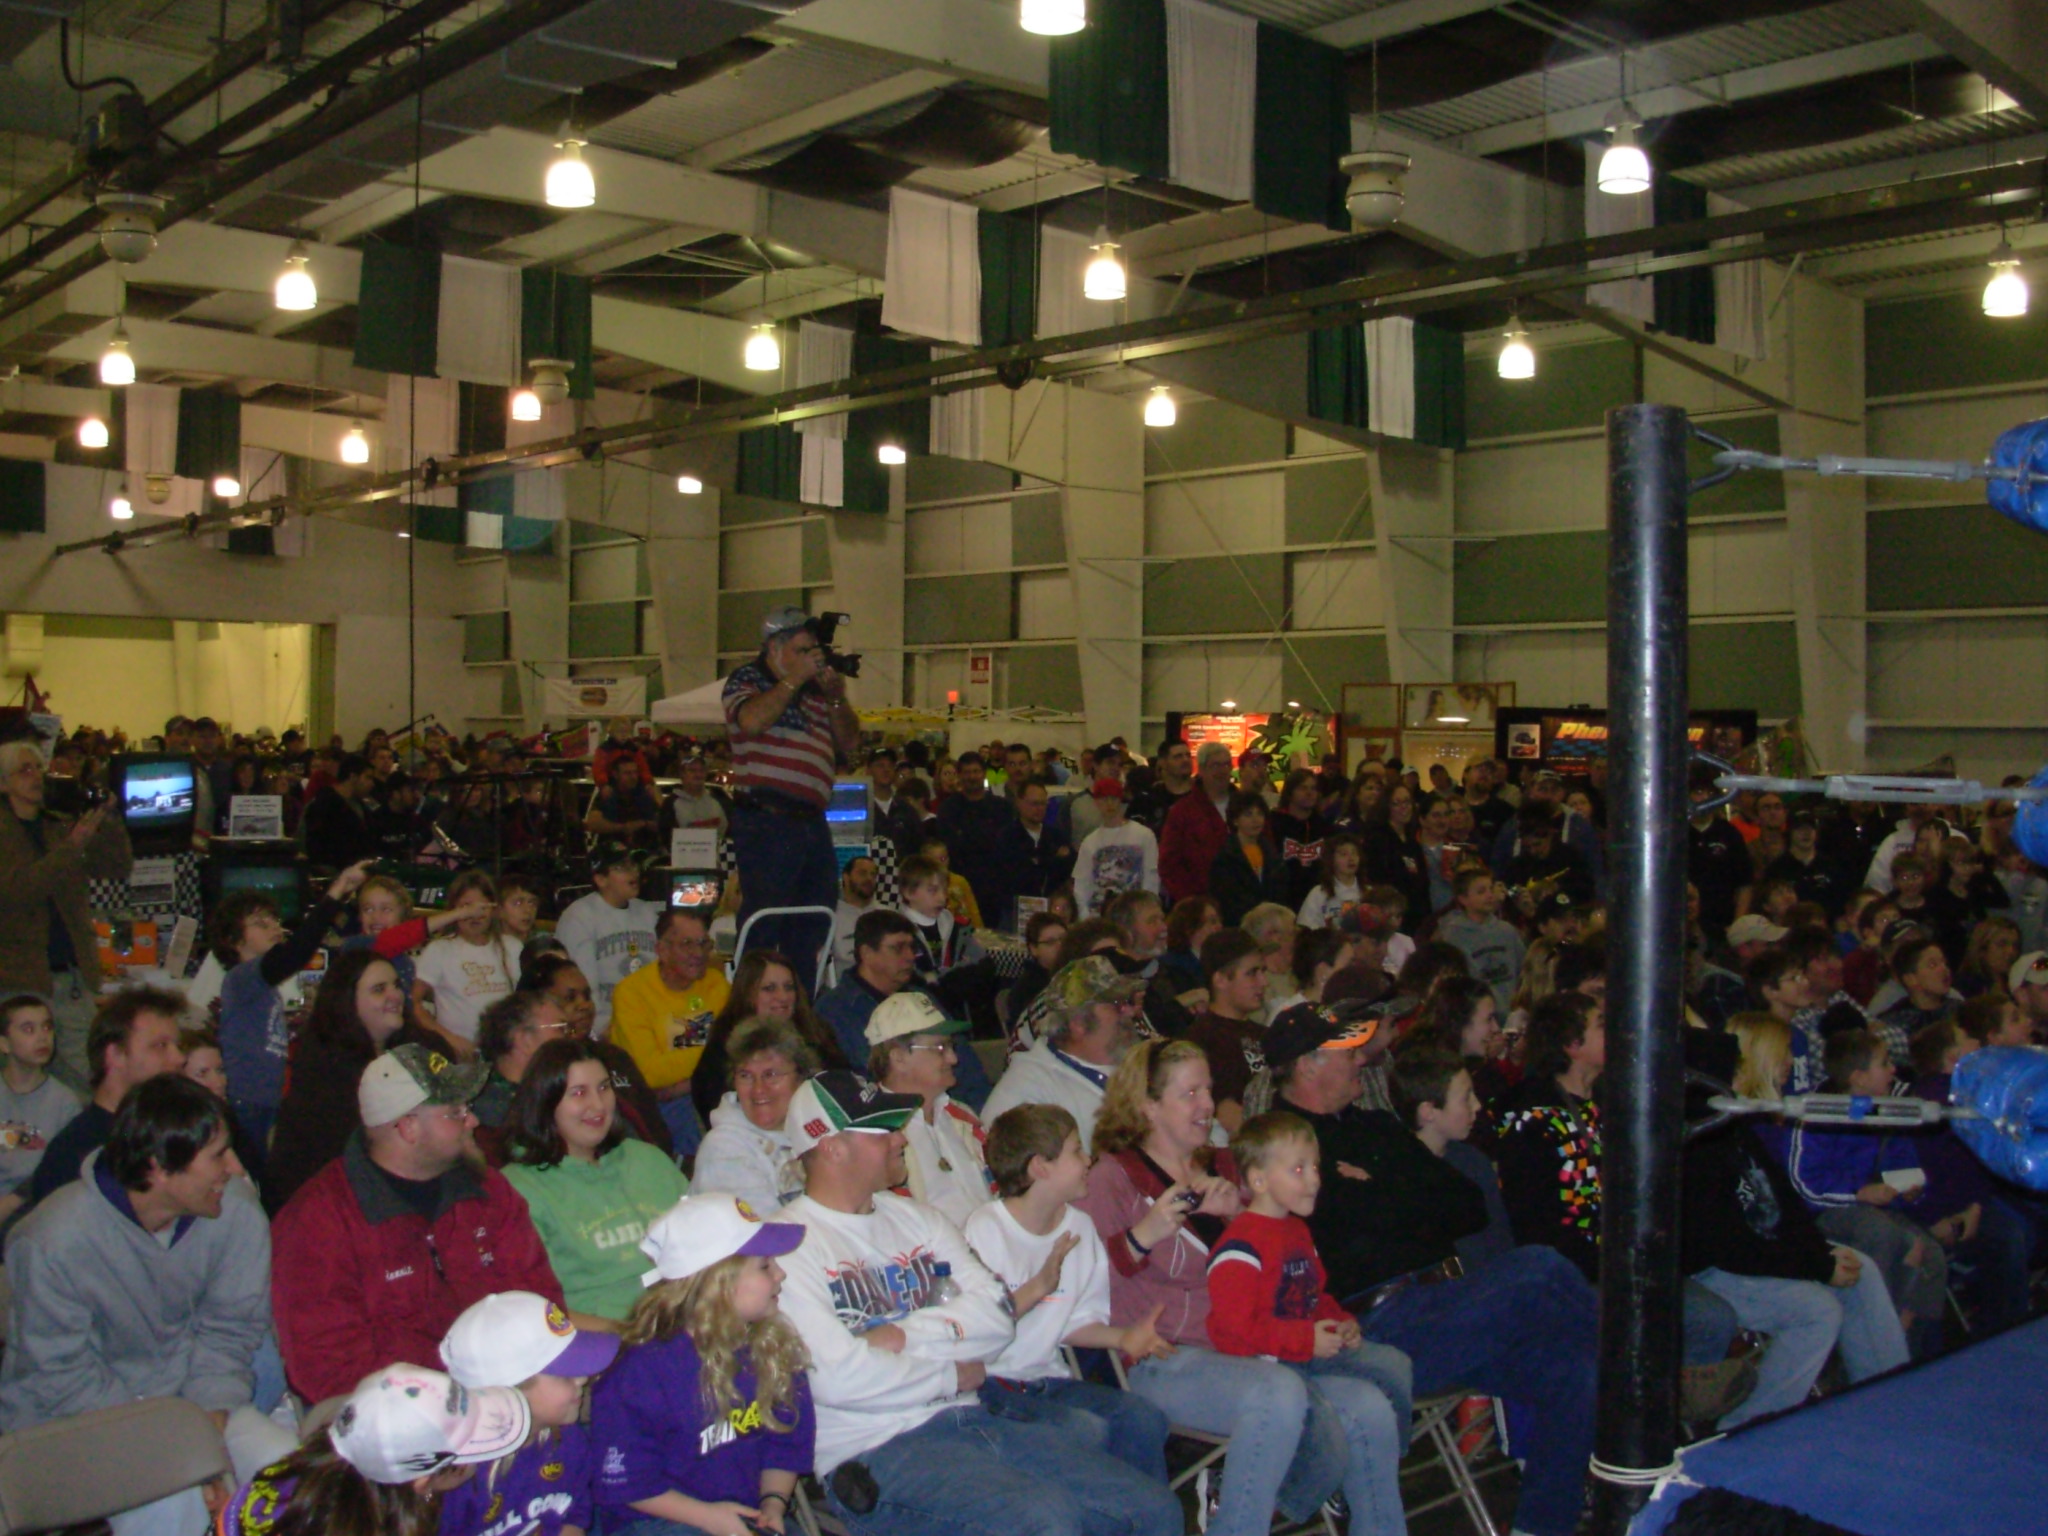 Standing room only for PWE Wrestling
